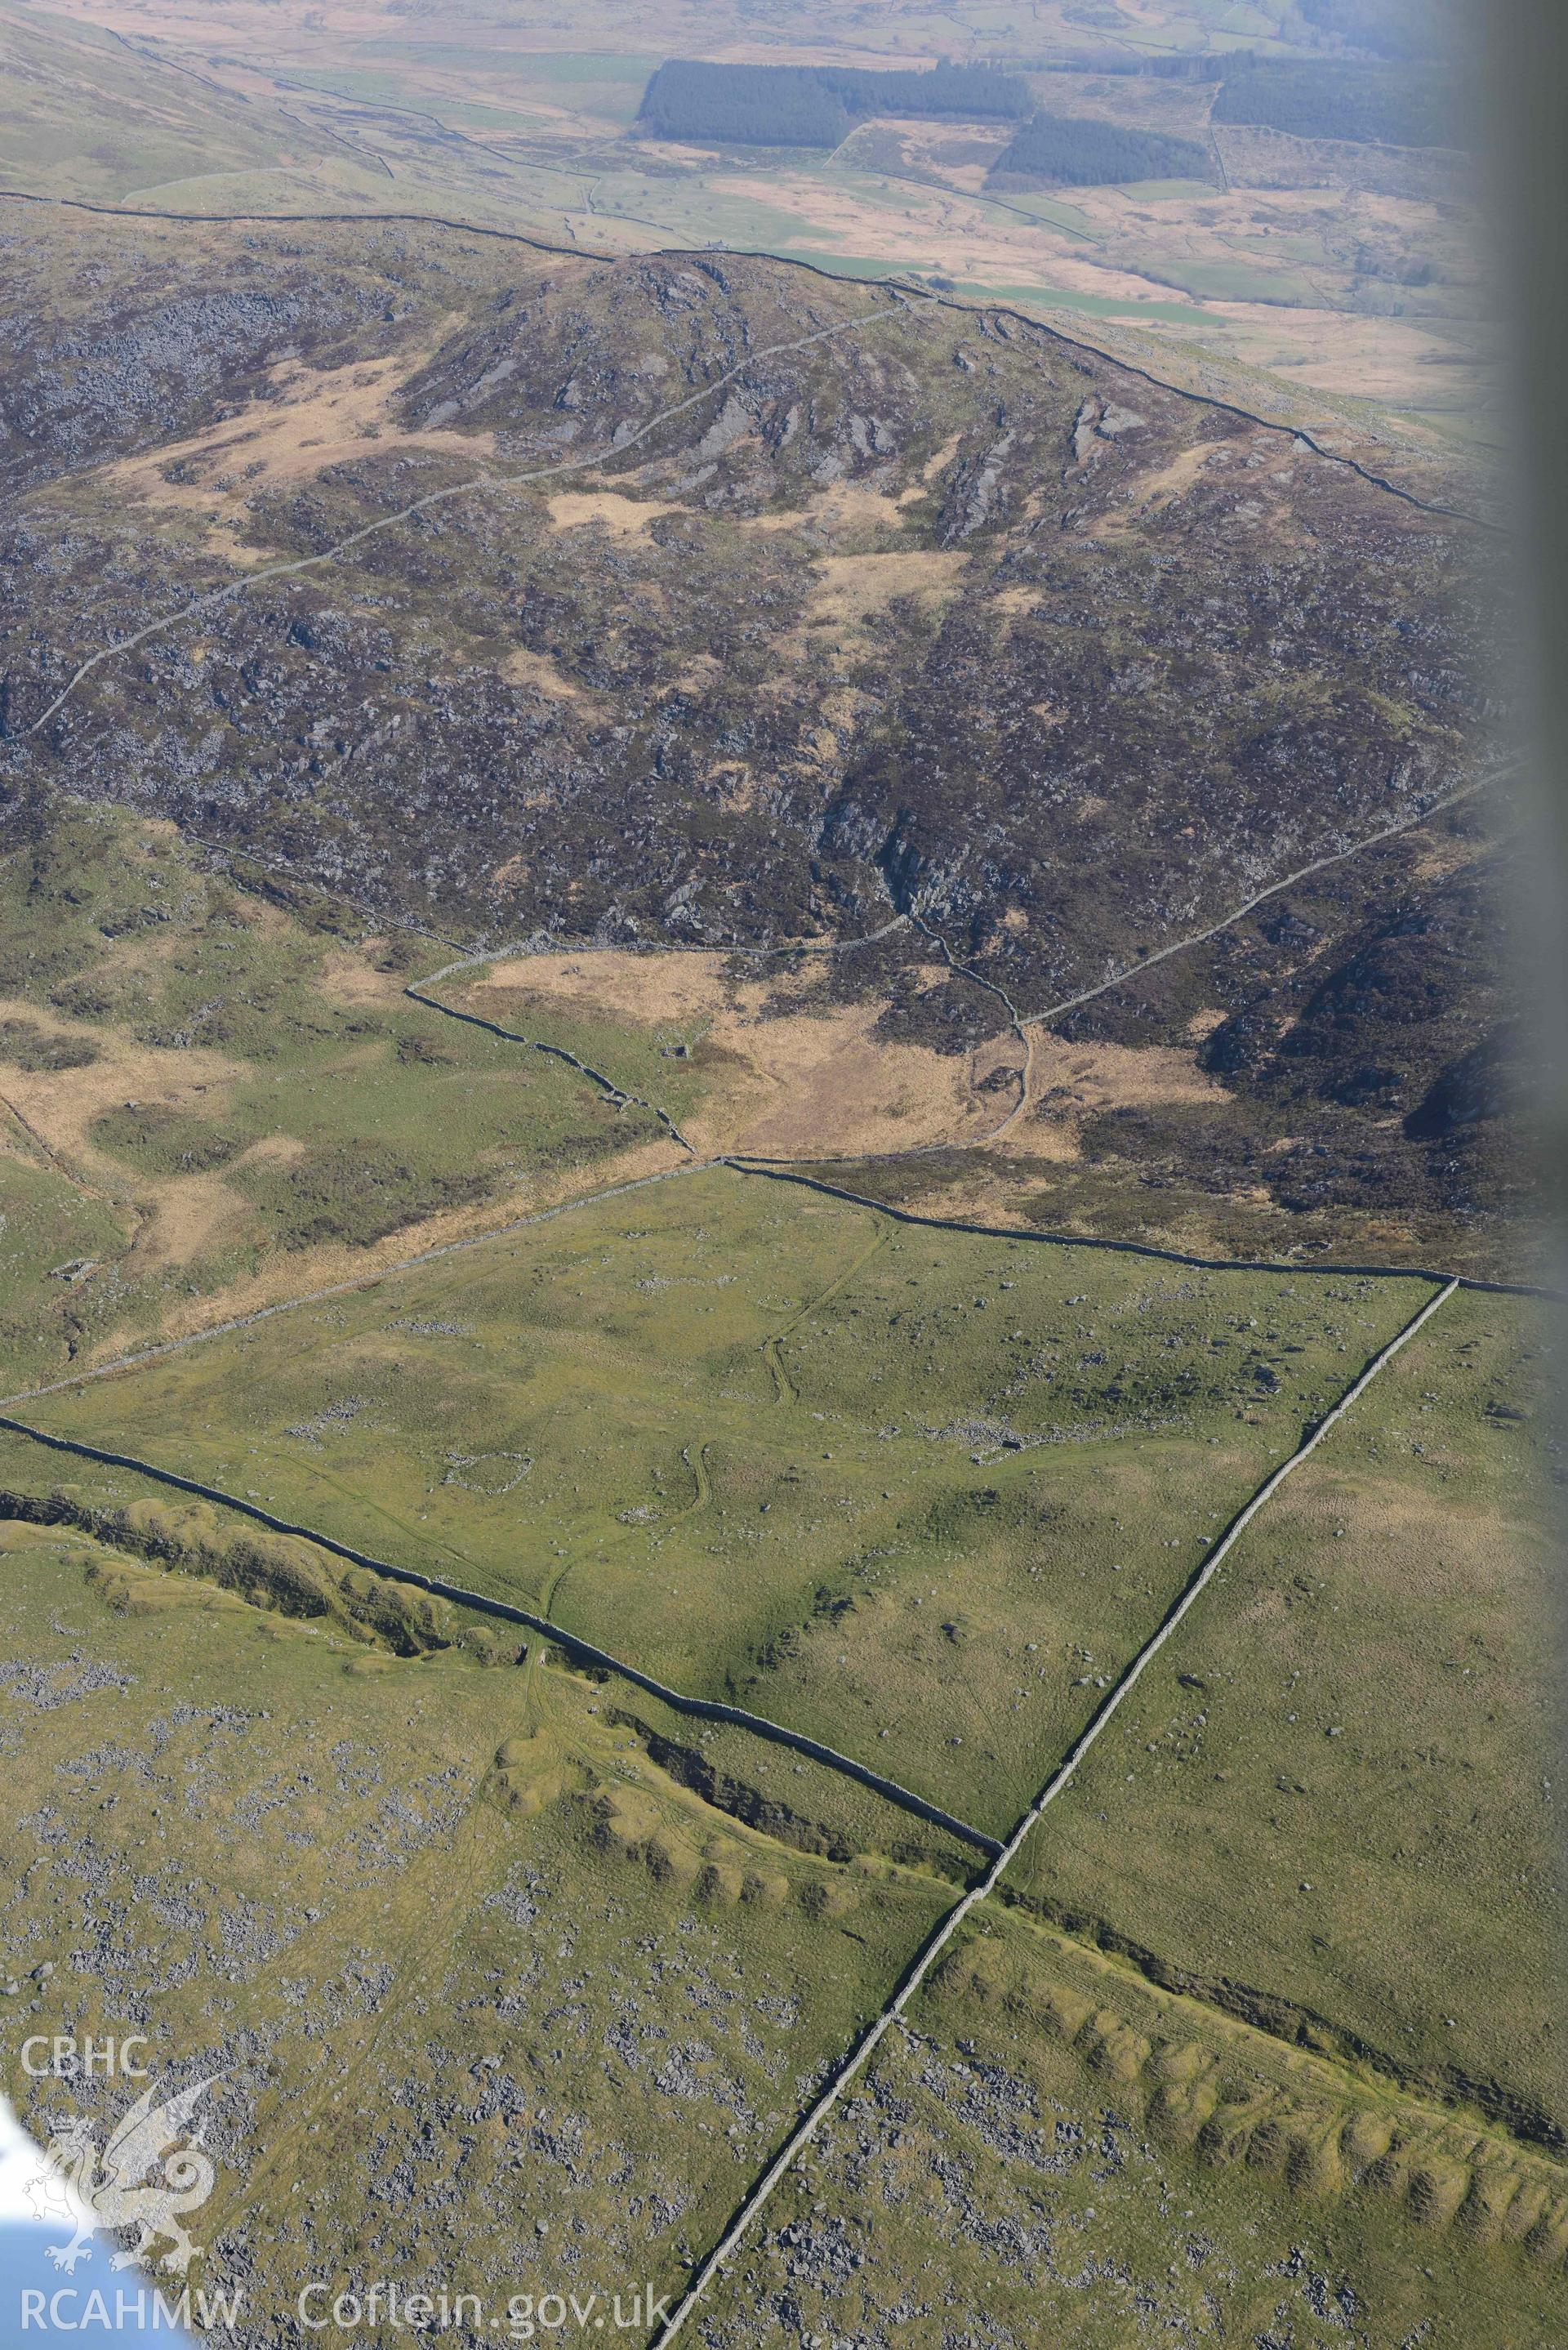 Ergyn and Hafotty manganese mines, view from the west. Oblique aerial photograph taken during the Royal Commission’s programme of archaeological aerial reconnaissance by Toby Driver on 25 March 2022.